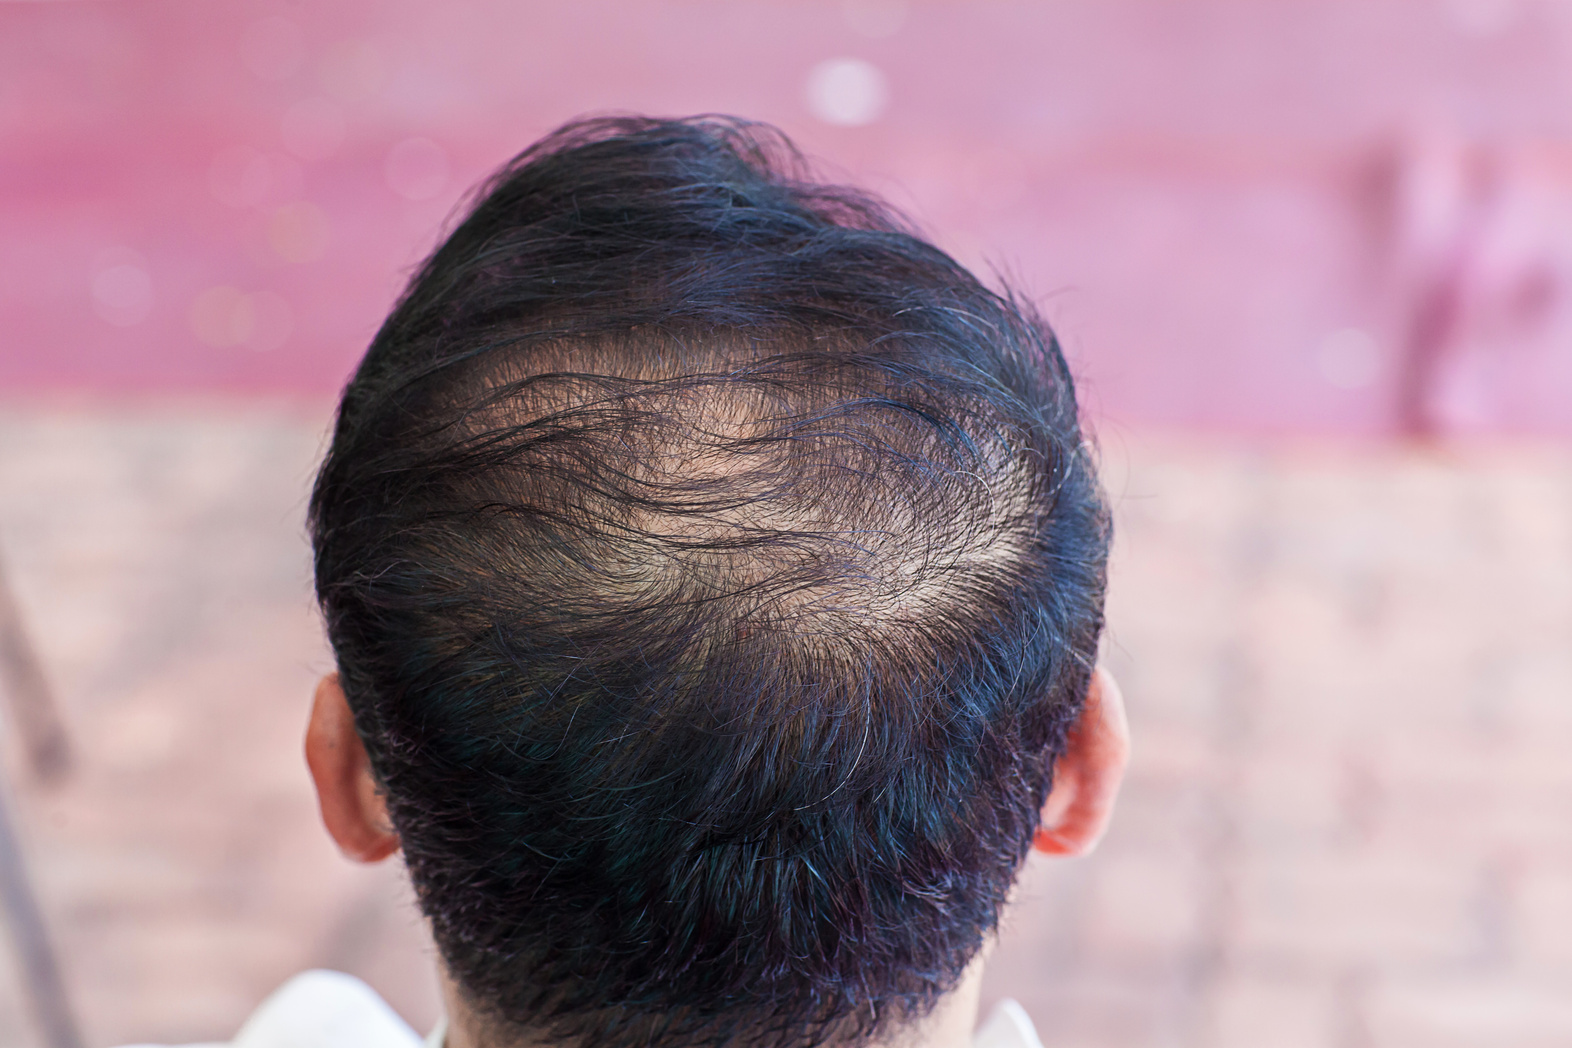 Close up hair loss, thinning hair and scalp issue. hair loss treatment.head with loss symptoms. Bald treatment.